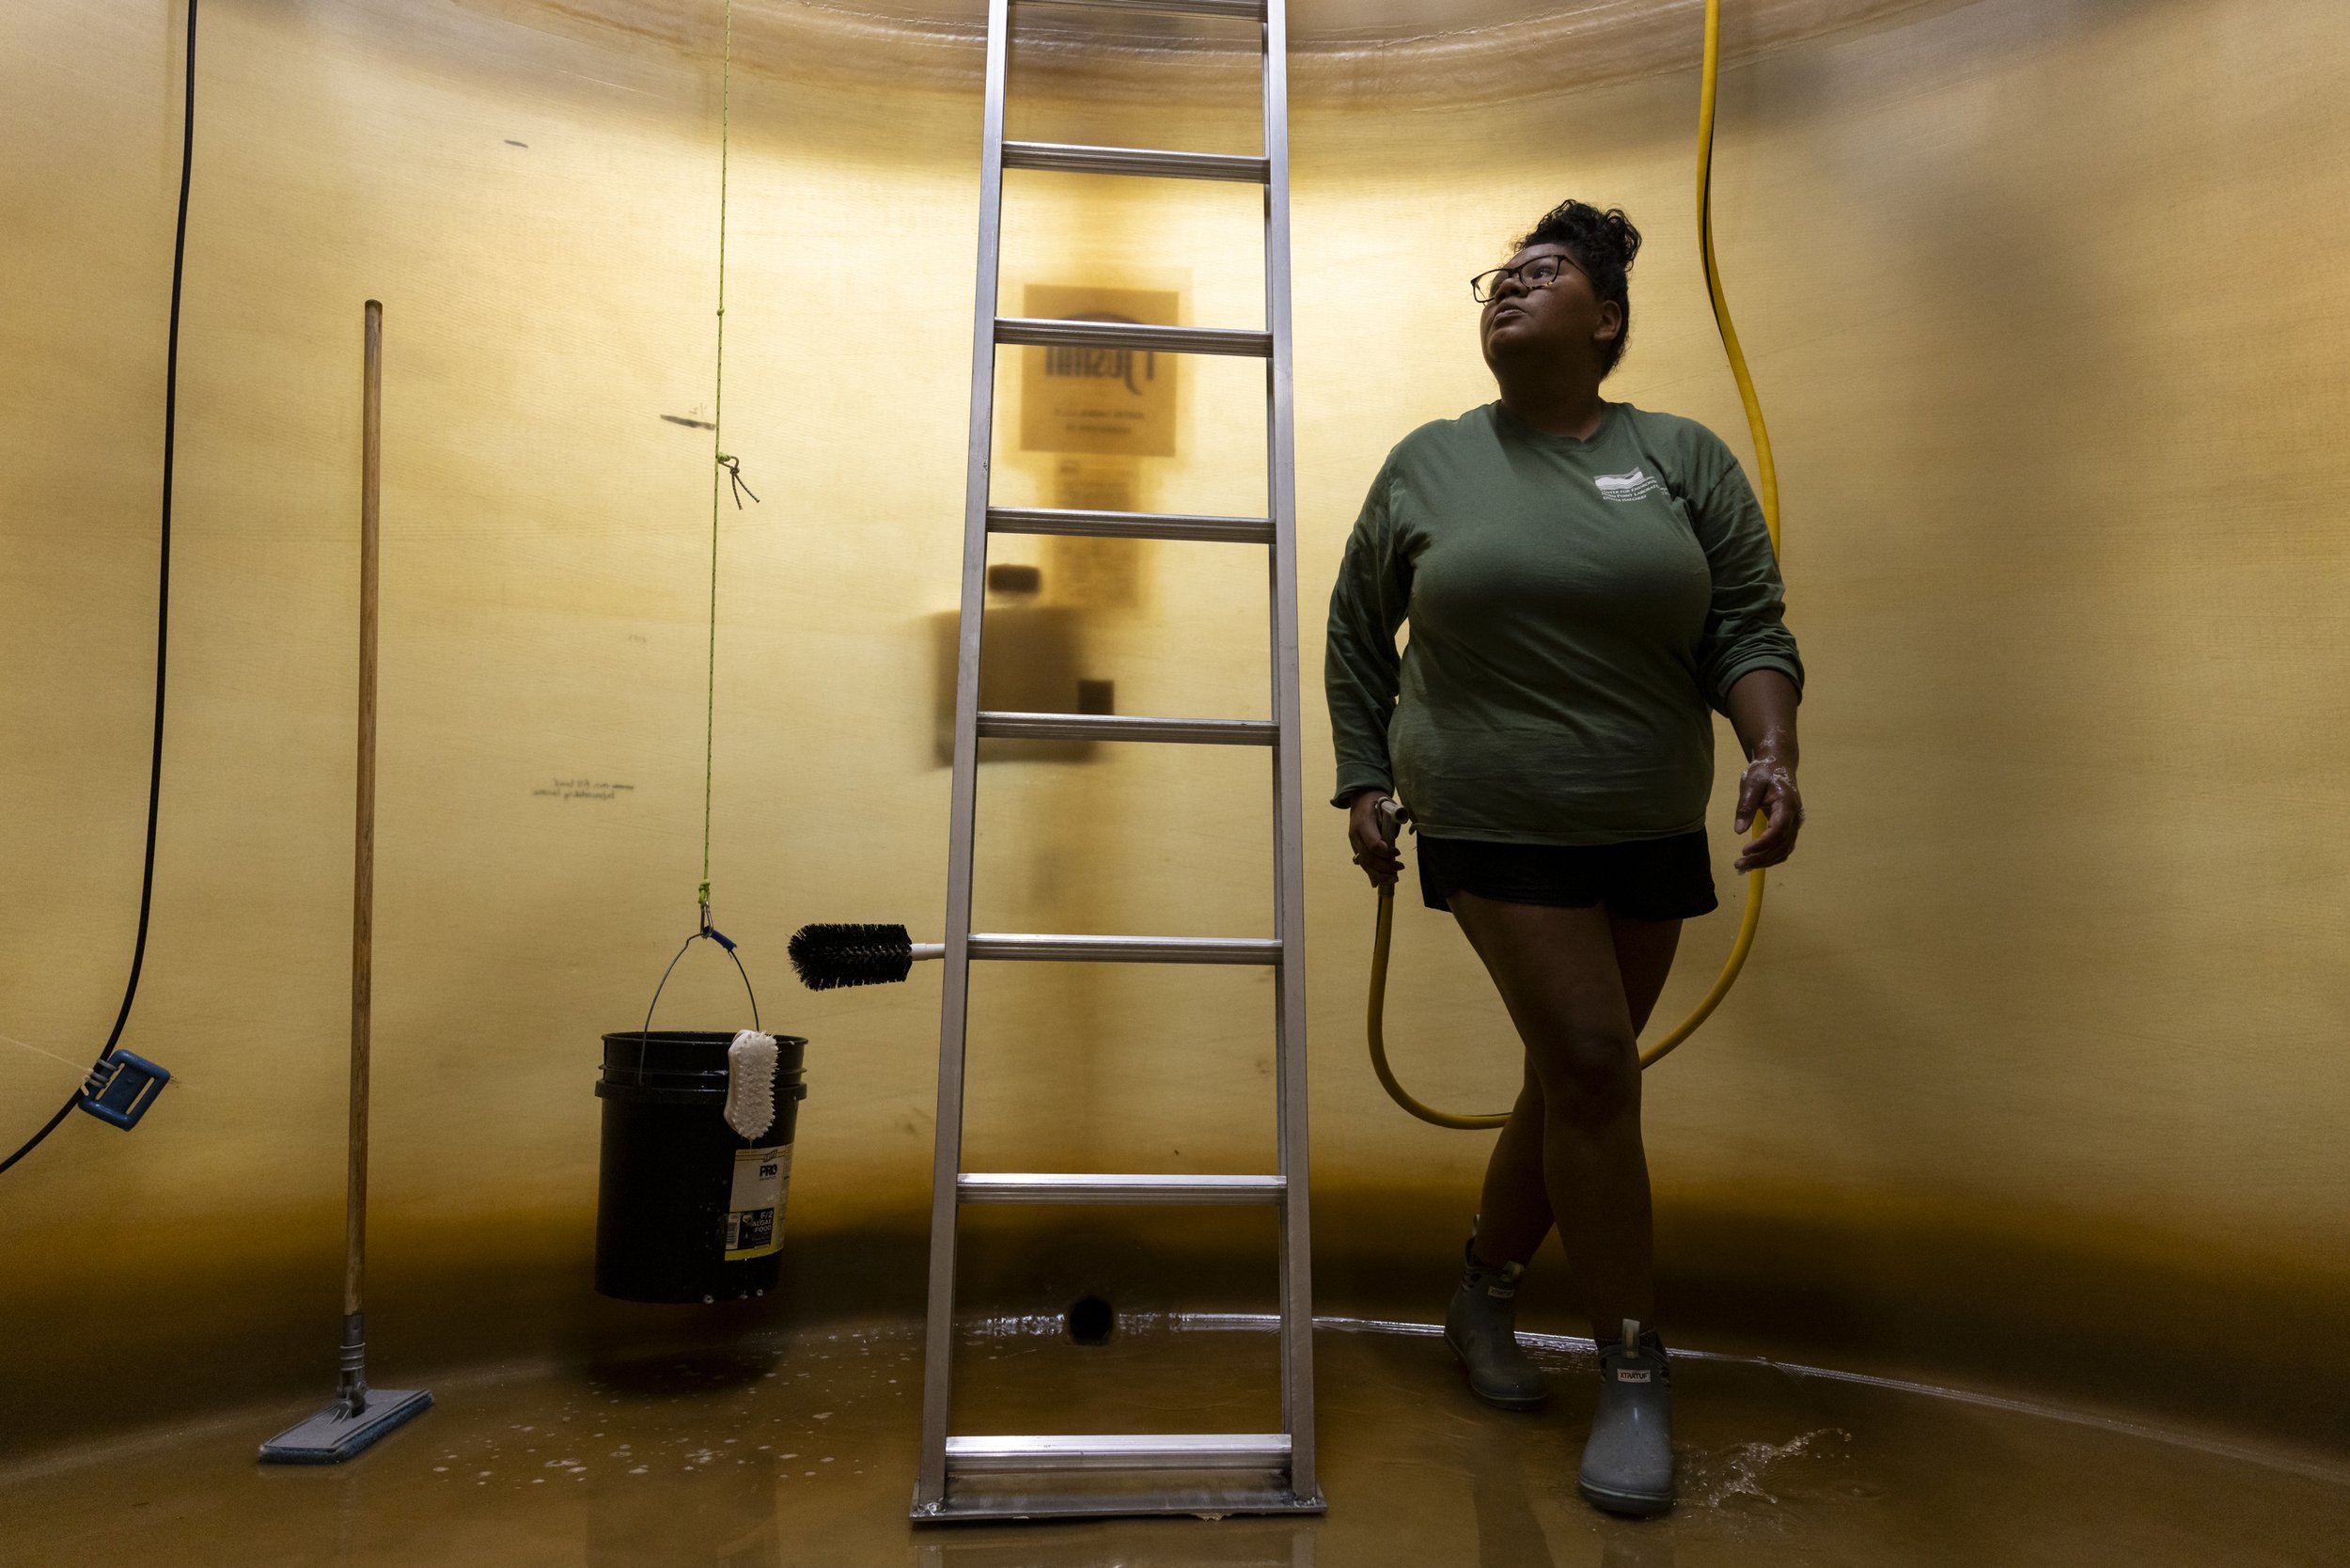  Makayla Lloyd, an intern with Minorities in Aquaculture (MIA), cleans a mass larvae tank at Horn Point Oyster Hatchery in Dorchester, Md., on Aug. 4, 2023. Lloyd found a deep love for oysters after being mentored by MIA founder, Imani Black. The org